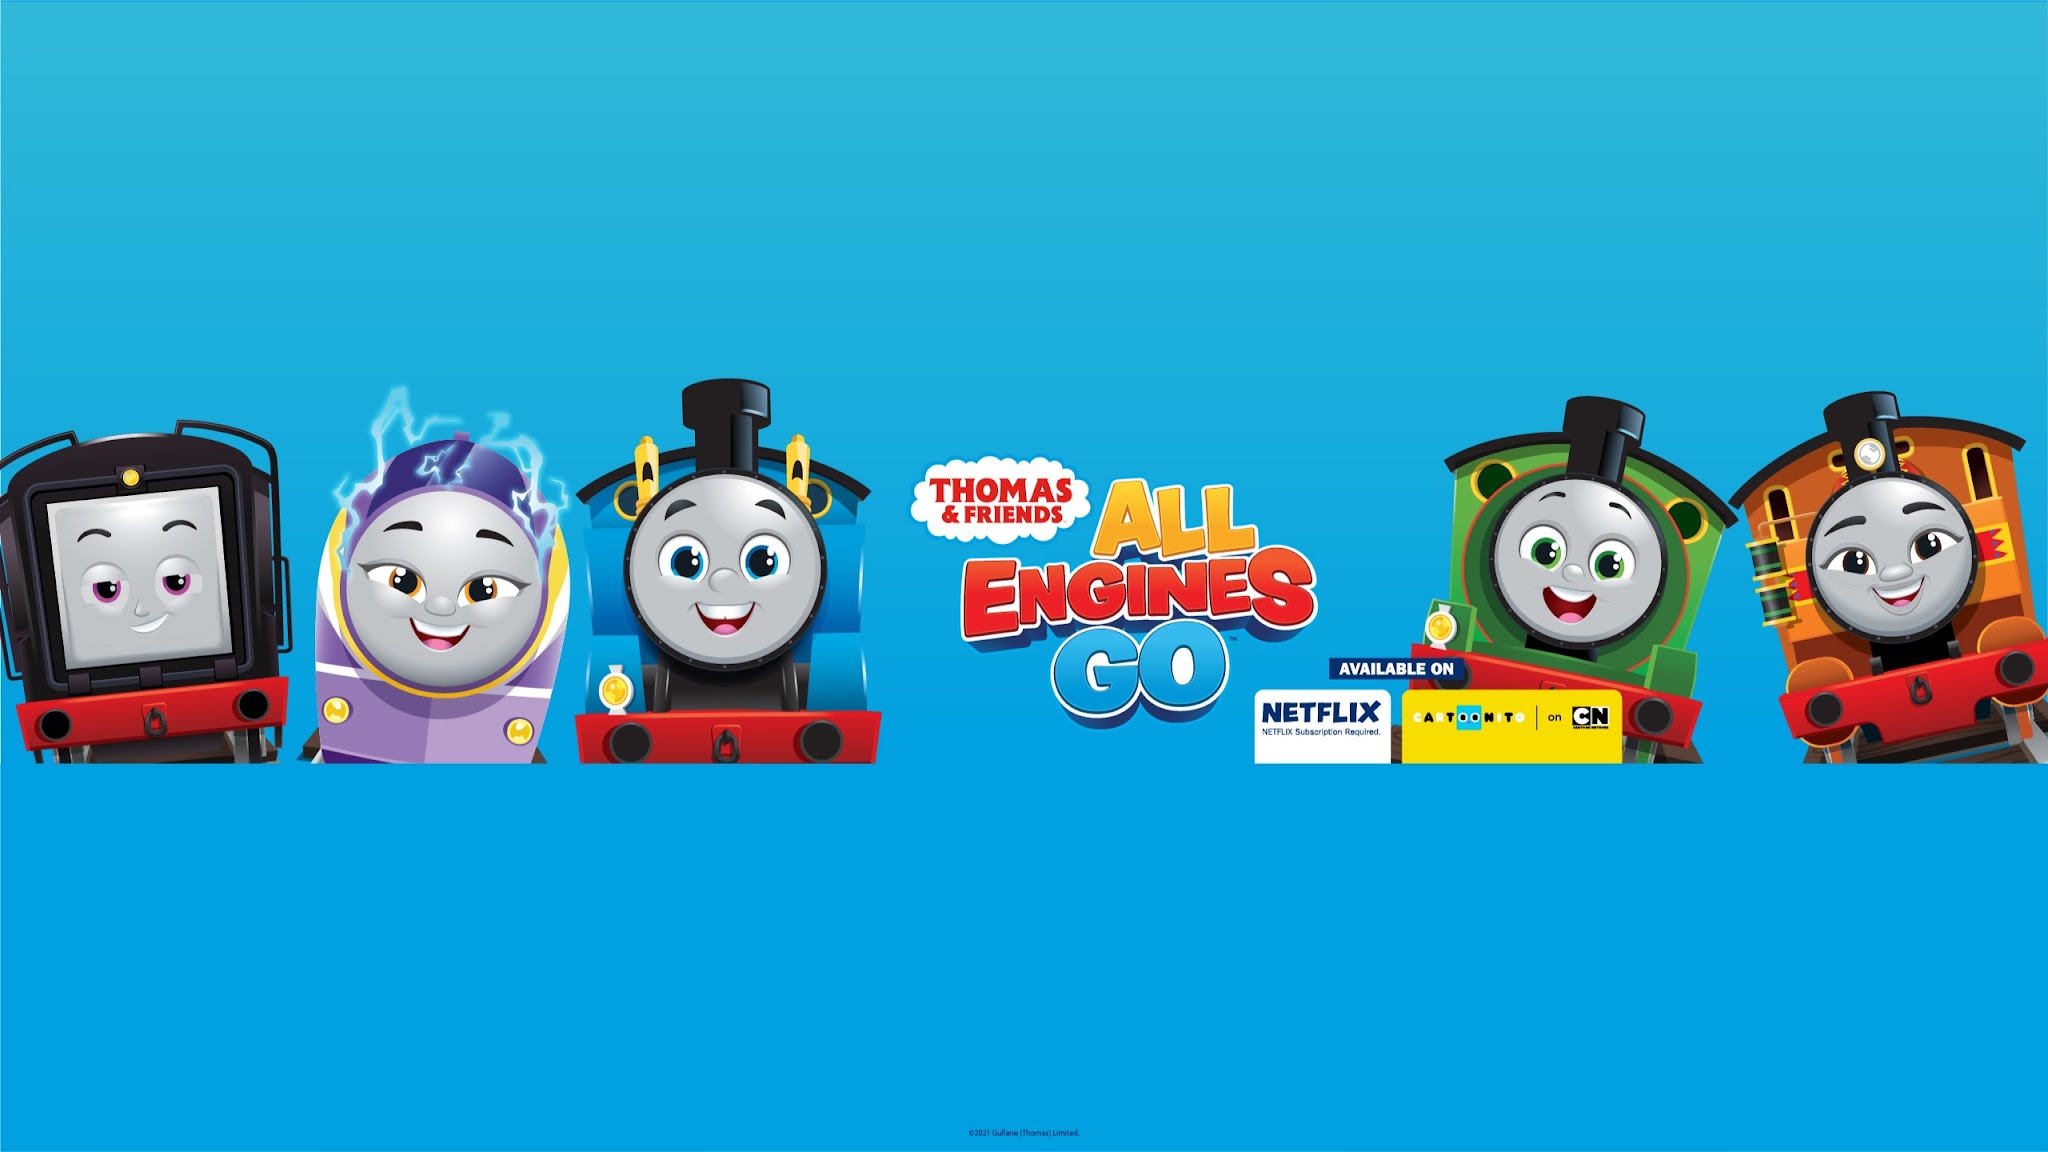 Thomas & Friends YouTube banner